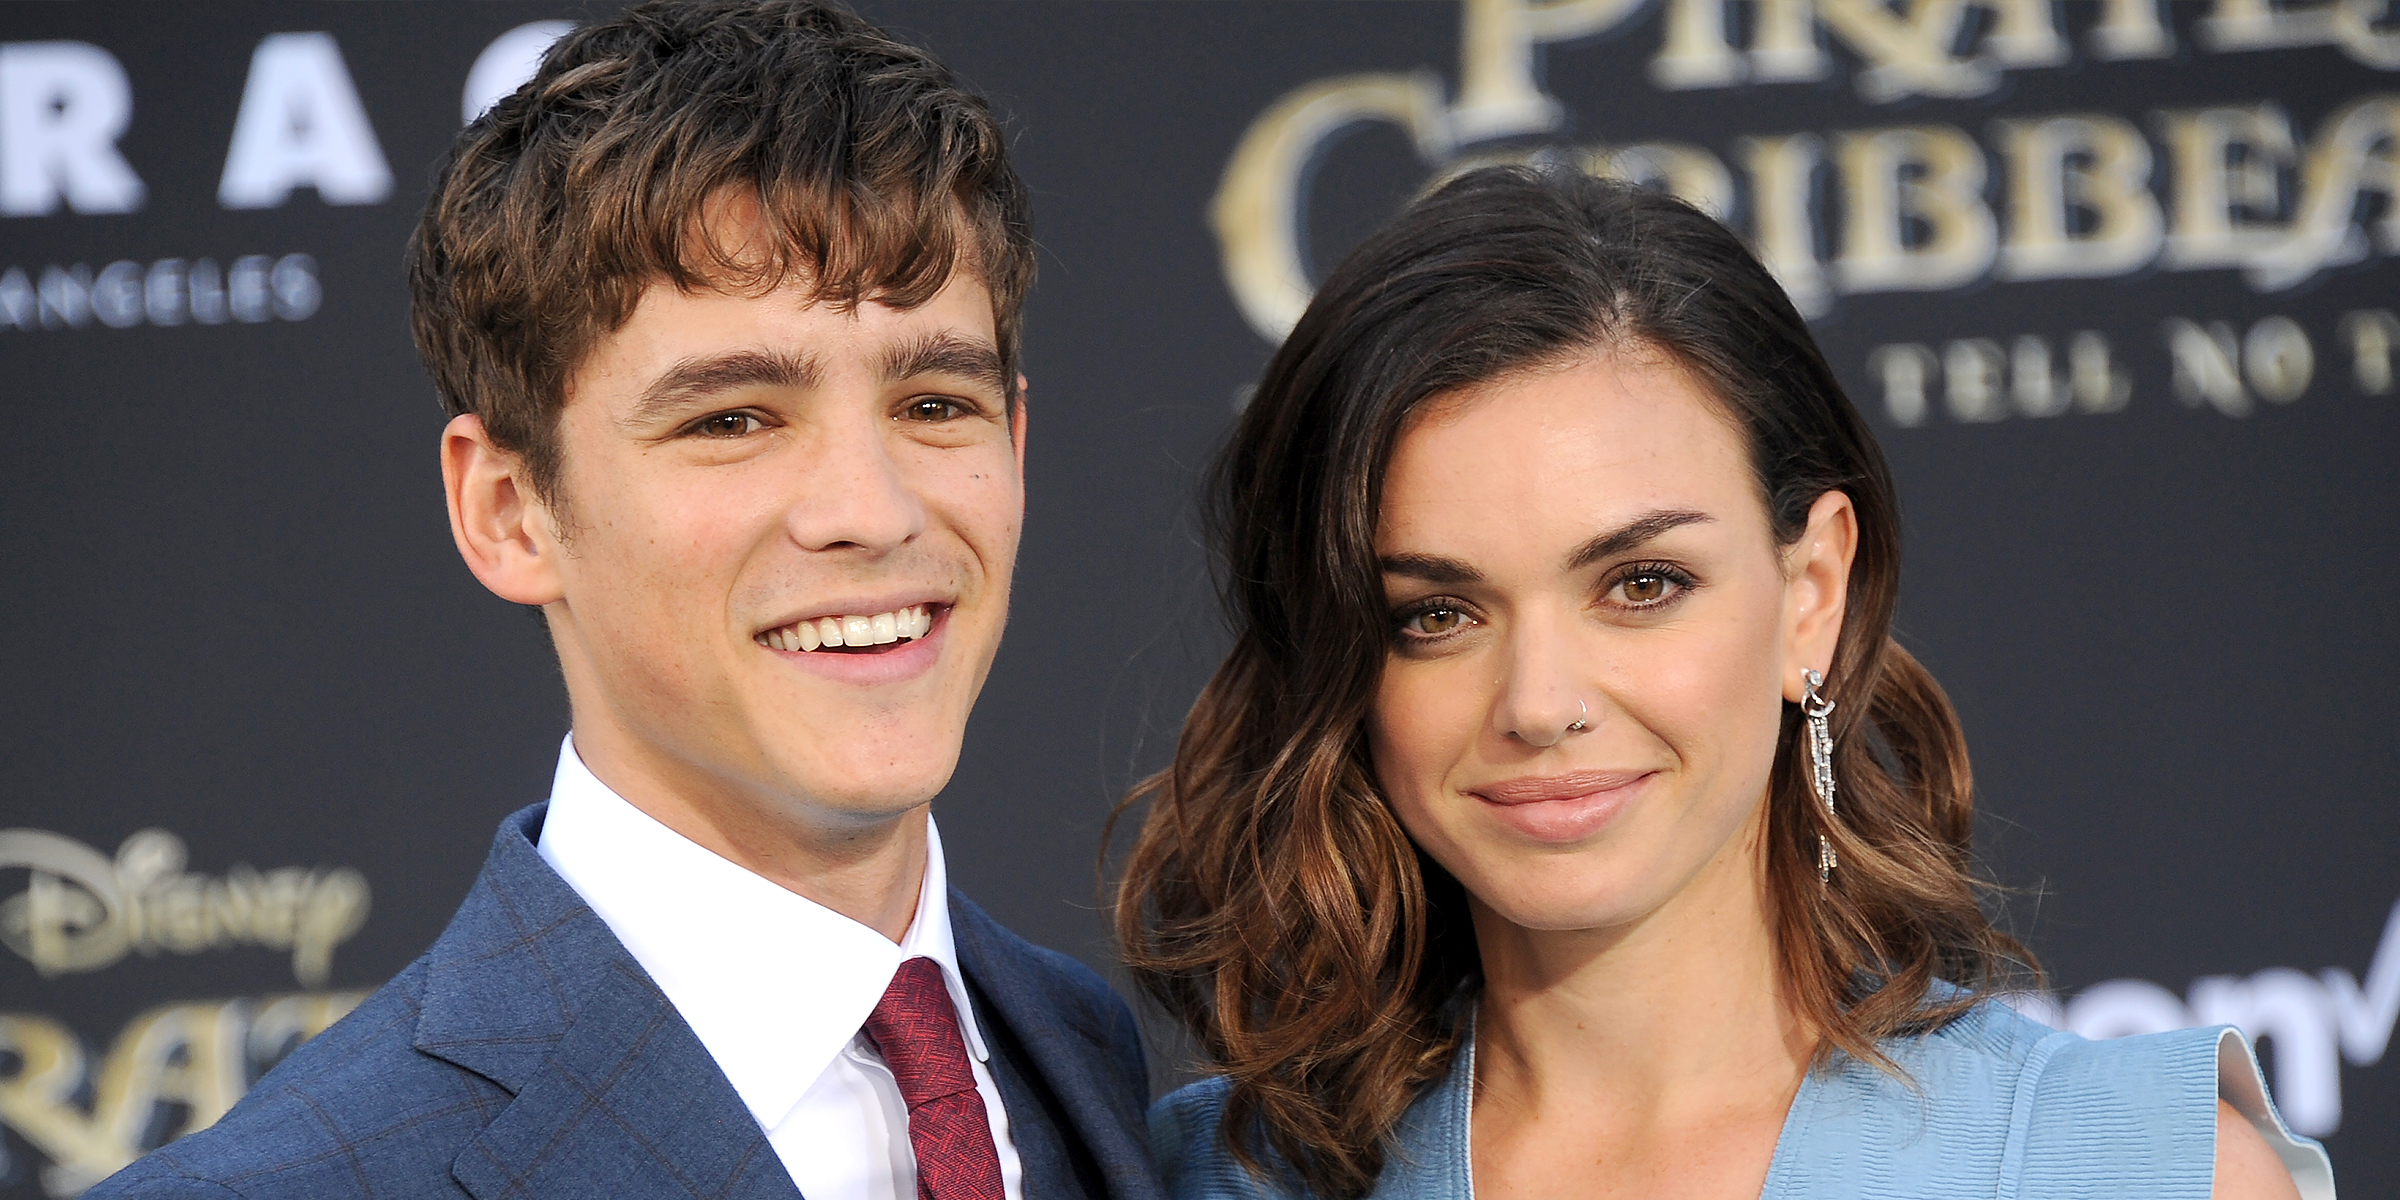 Brenton Thwaites and Chloe Pacey | Source: Getty Images